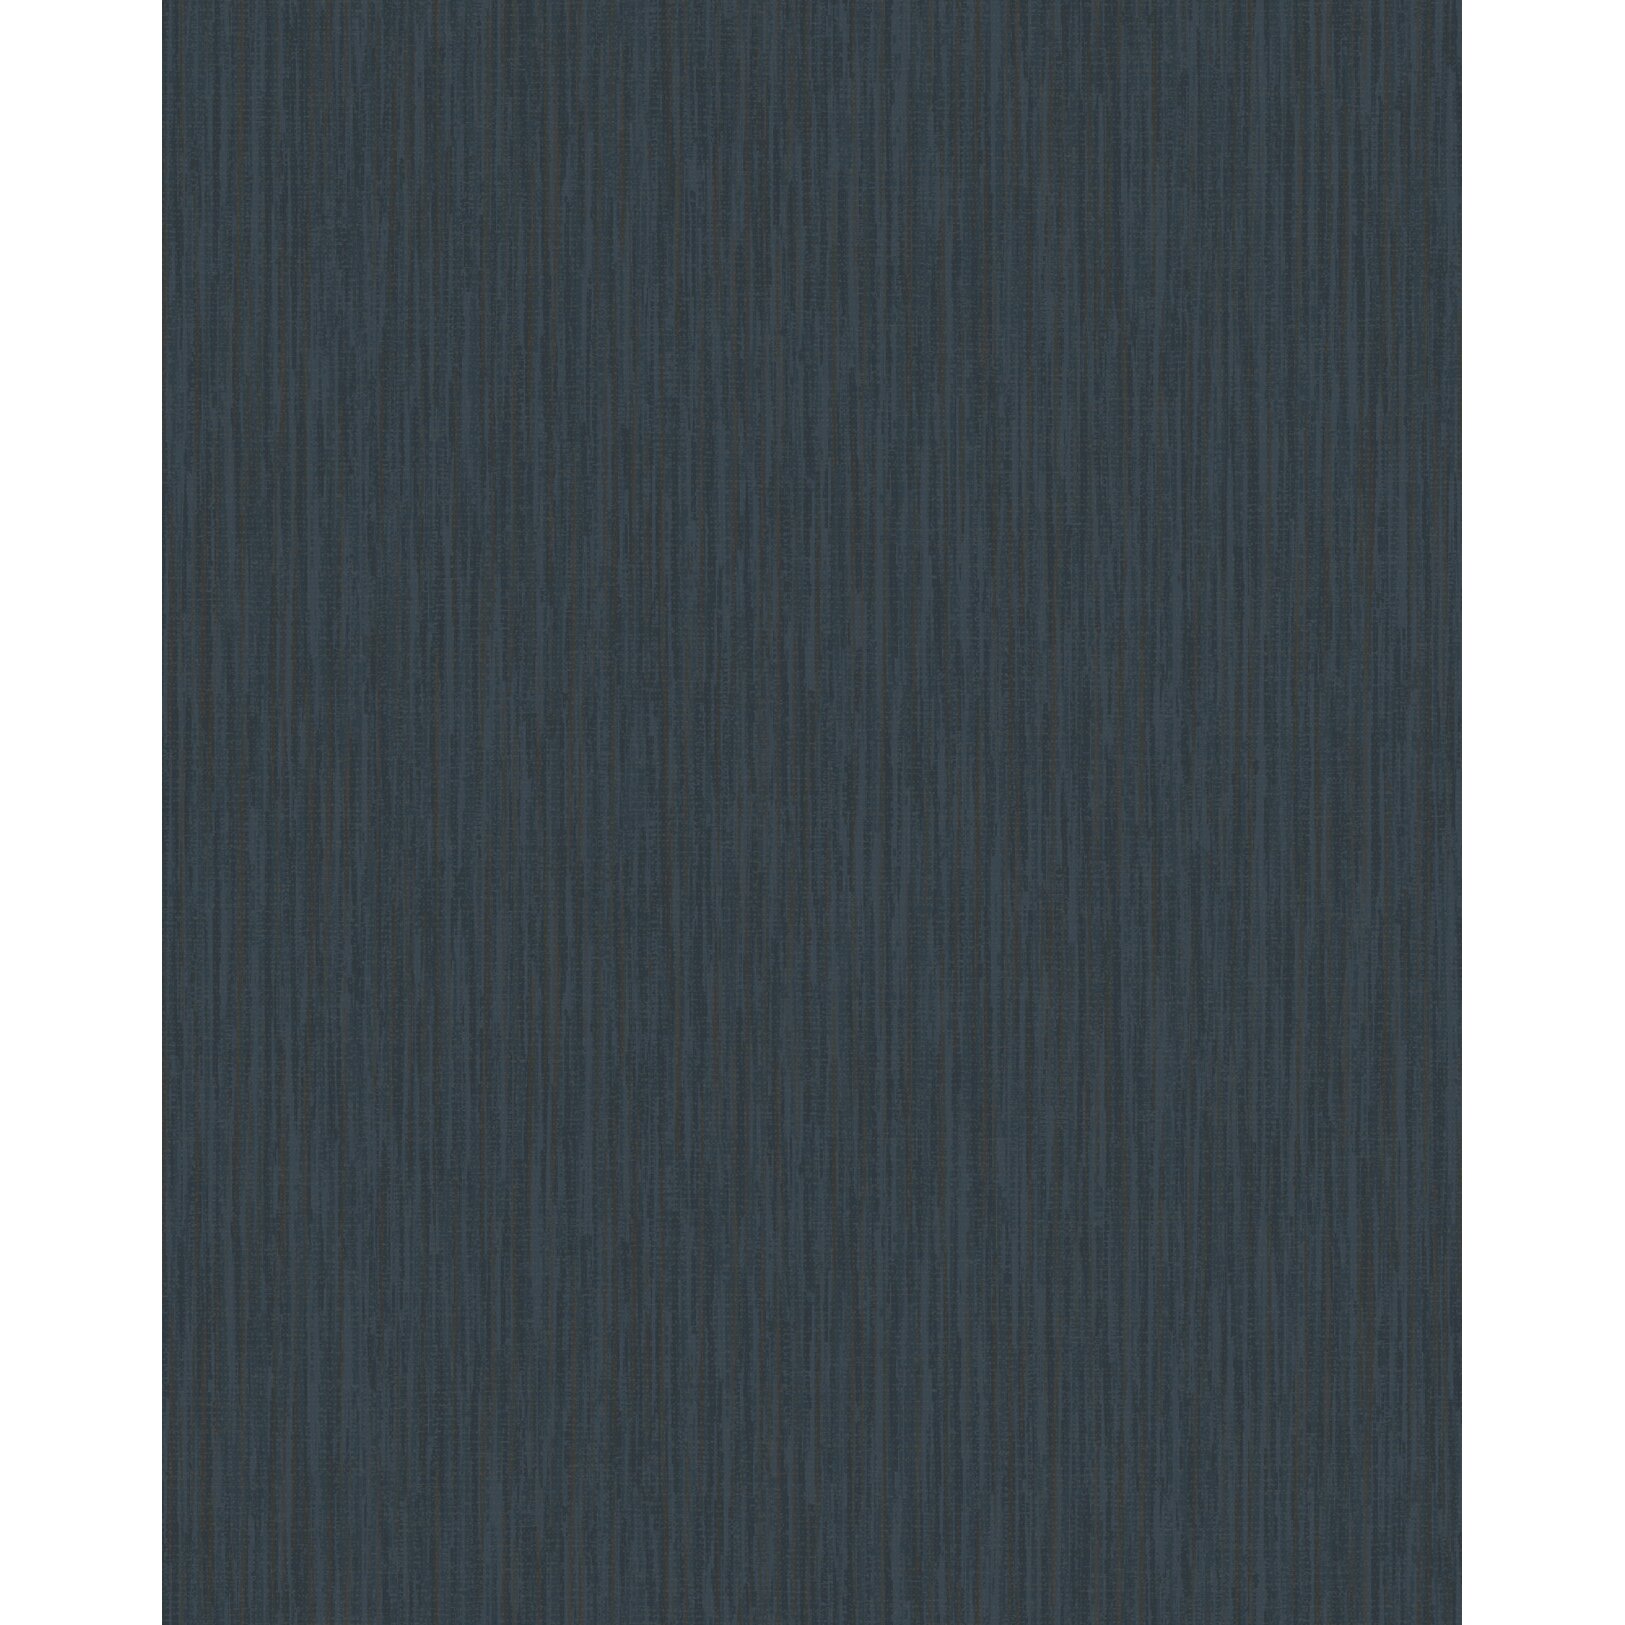 Profhome VD219140-DI Textured wallpaper wall shimmering blue 5.33 m2